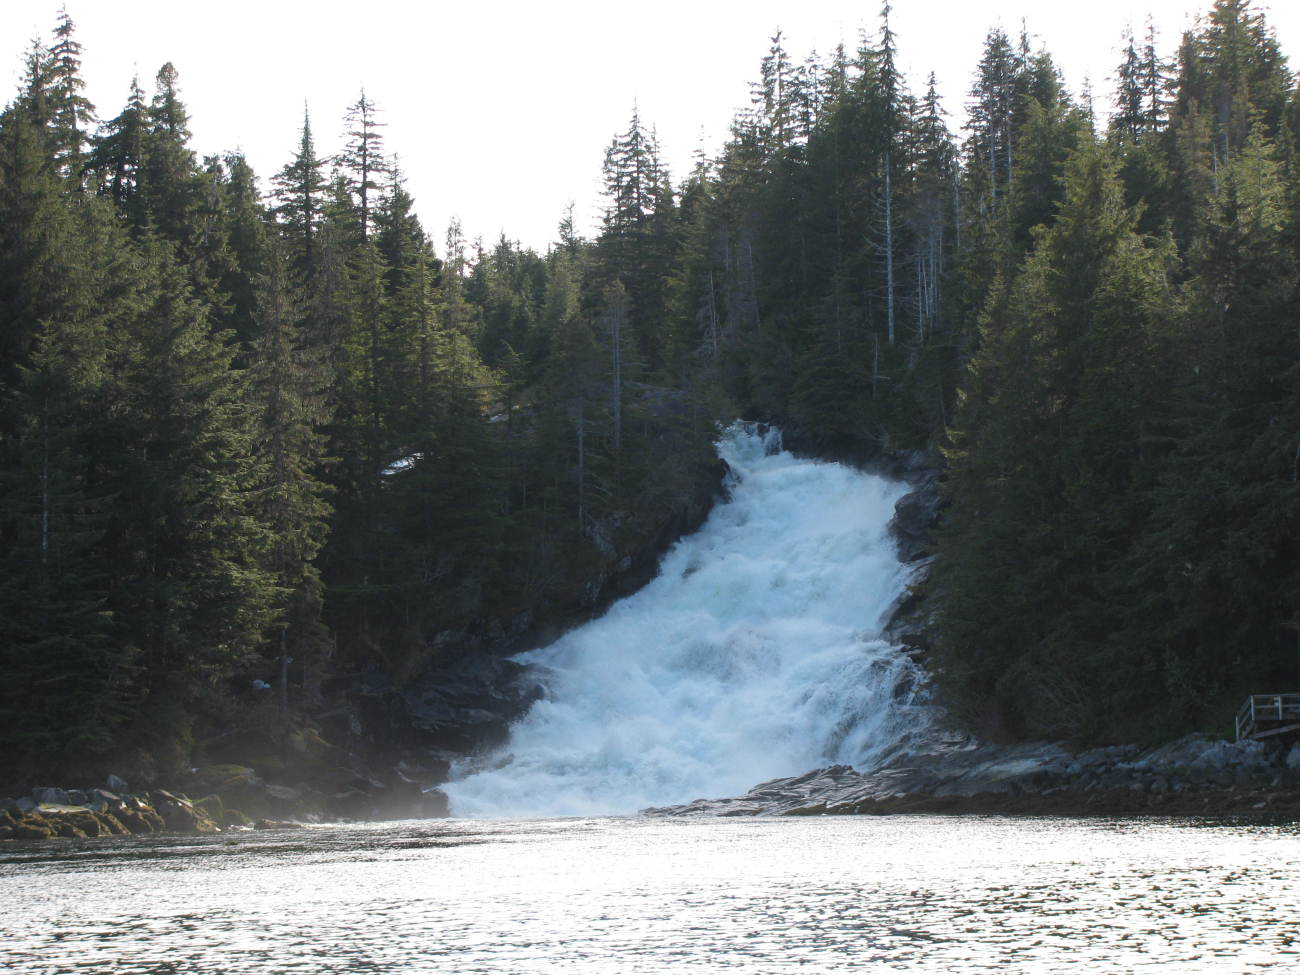 Baranof River waterfalls as they enter Warm Springs Bay